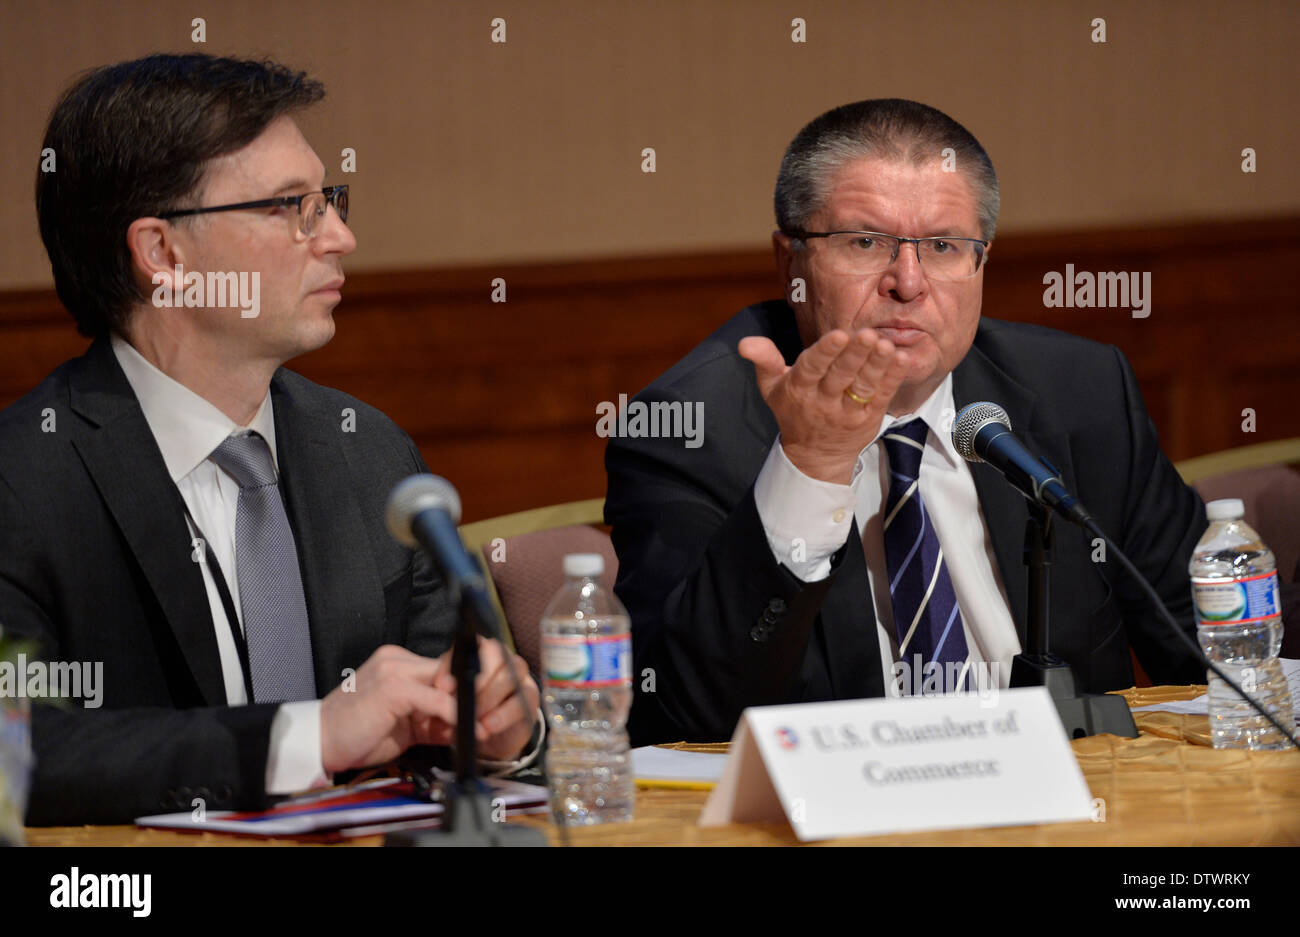 Washington DC, USA. 24th Feb, 2014. Russian Economic Development Minister Alexei Ulyukaev (R) addresses a meeting held by the U.S. Chamber of Commerce in Washington DC, capital of the United States, Feb. 24, 2014. Alexei Ulyukaev said here on Monday that Russia's 15- billion-U.S. dollar bail-out funds for Ukraine will continue despite the current chaos, but Russia is waiting for the answer that who will be its Ukrainian partner. Credit:  Bao Dandan/Xinhua/Alamy Live News Stock Photo